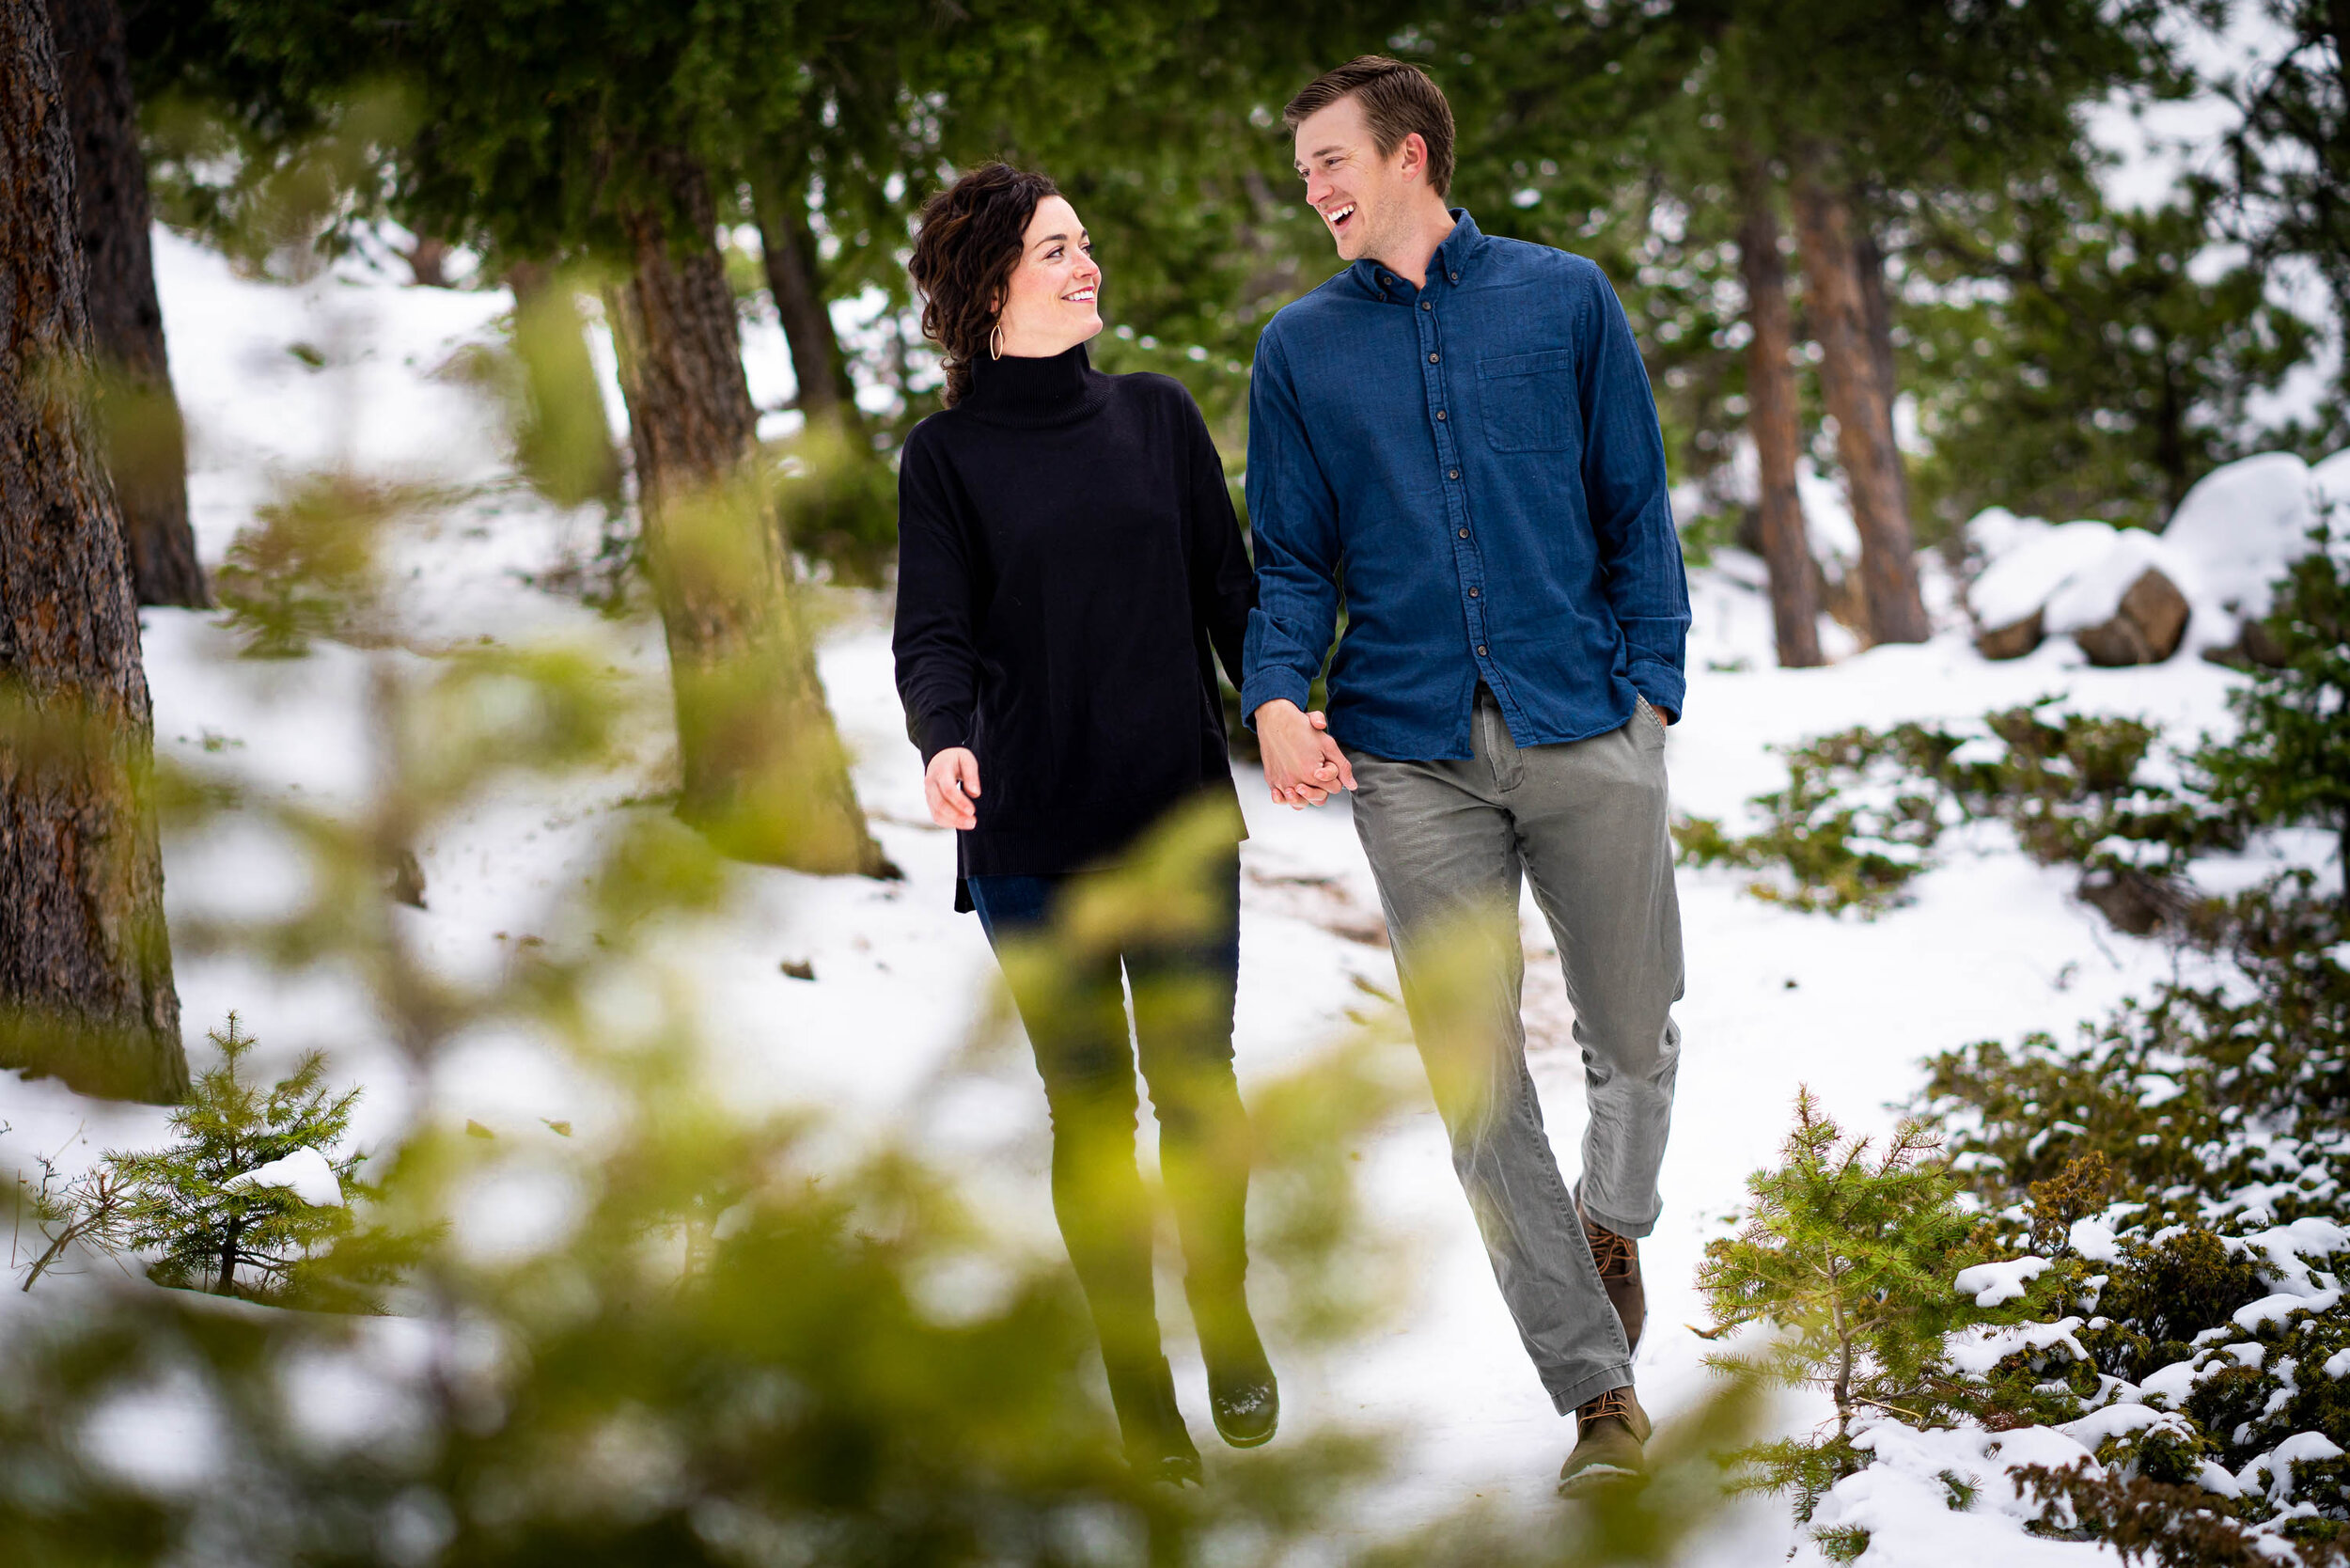 Engaged couple walks while holding hands in the snow in a dense evergreen mountain forest, Engagement Session, Engagement Photos, Engagement Photos Inspiration, Engagement Photography, Engagement Photographer, Winter Engagement Photos, Mountain Engagement Photos, Lost Gulch Overlook engagement session, Lost Gulch Overlook engagement photos, Lost Gulch Overlook engagement photography, Lost Gulch Overlook engagement photographer, Lost Gulch Overlook  engagement inspiration, Boulder engagement session, Boulder engagement photos, Boulder engagement photography, Boulder engagement photographer, Boulder engagement inspiration, Colorado engagement session, Colorado engagement photos, Colorado engagement photography, Colorado engagement photographer, Colorado engagement inspiration